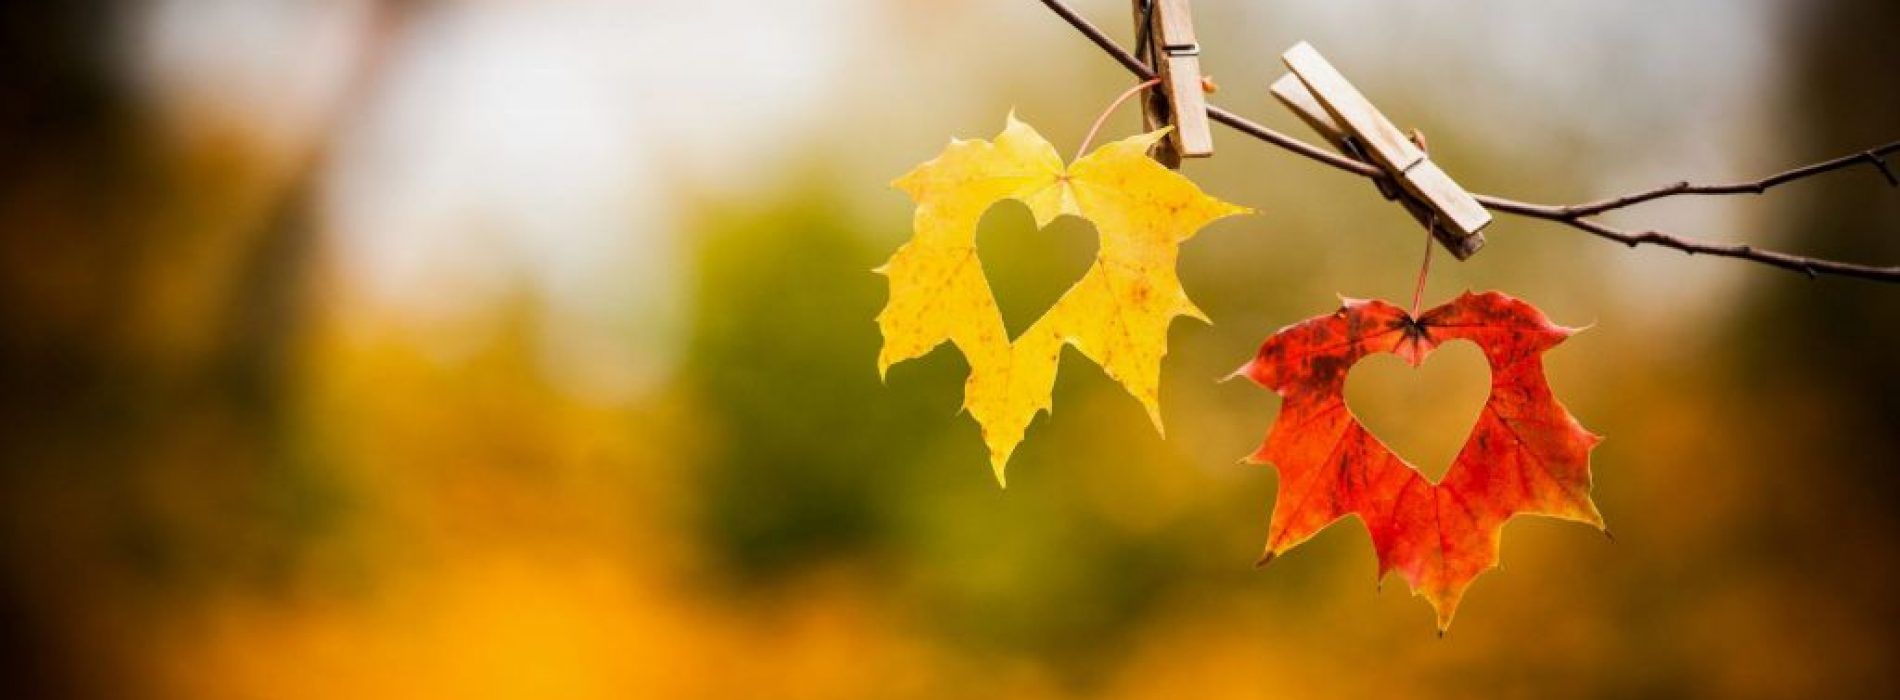 FALL in LOVE with Selling Your Home this Season!